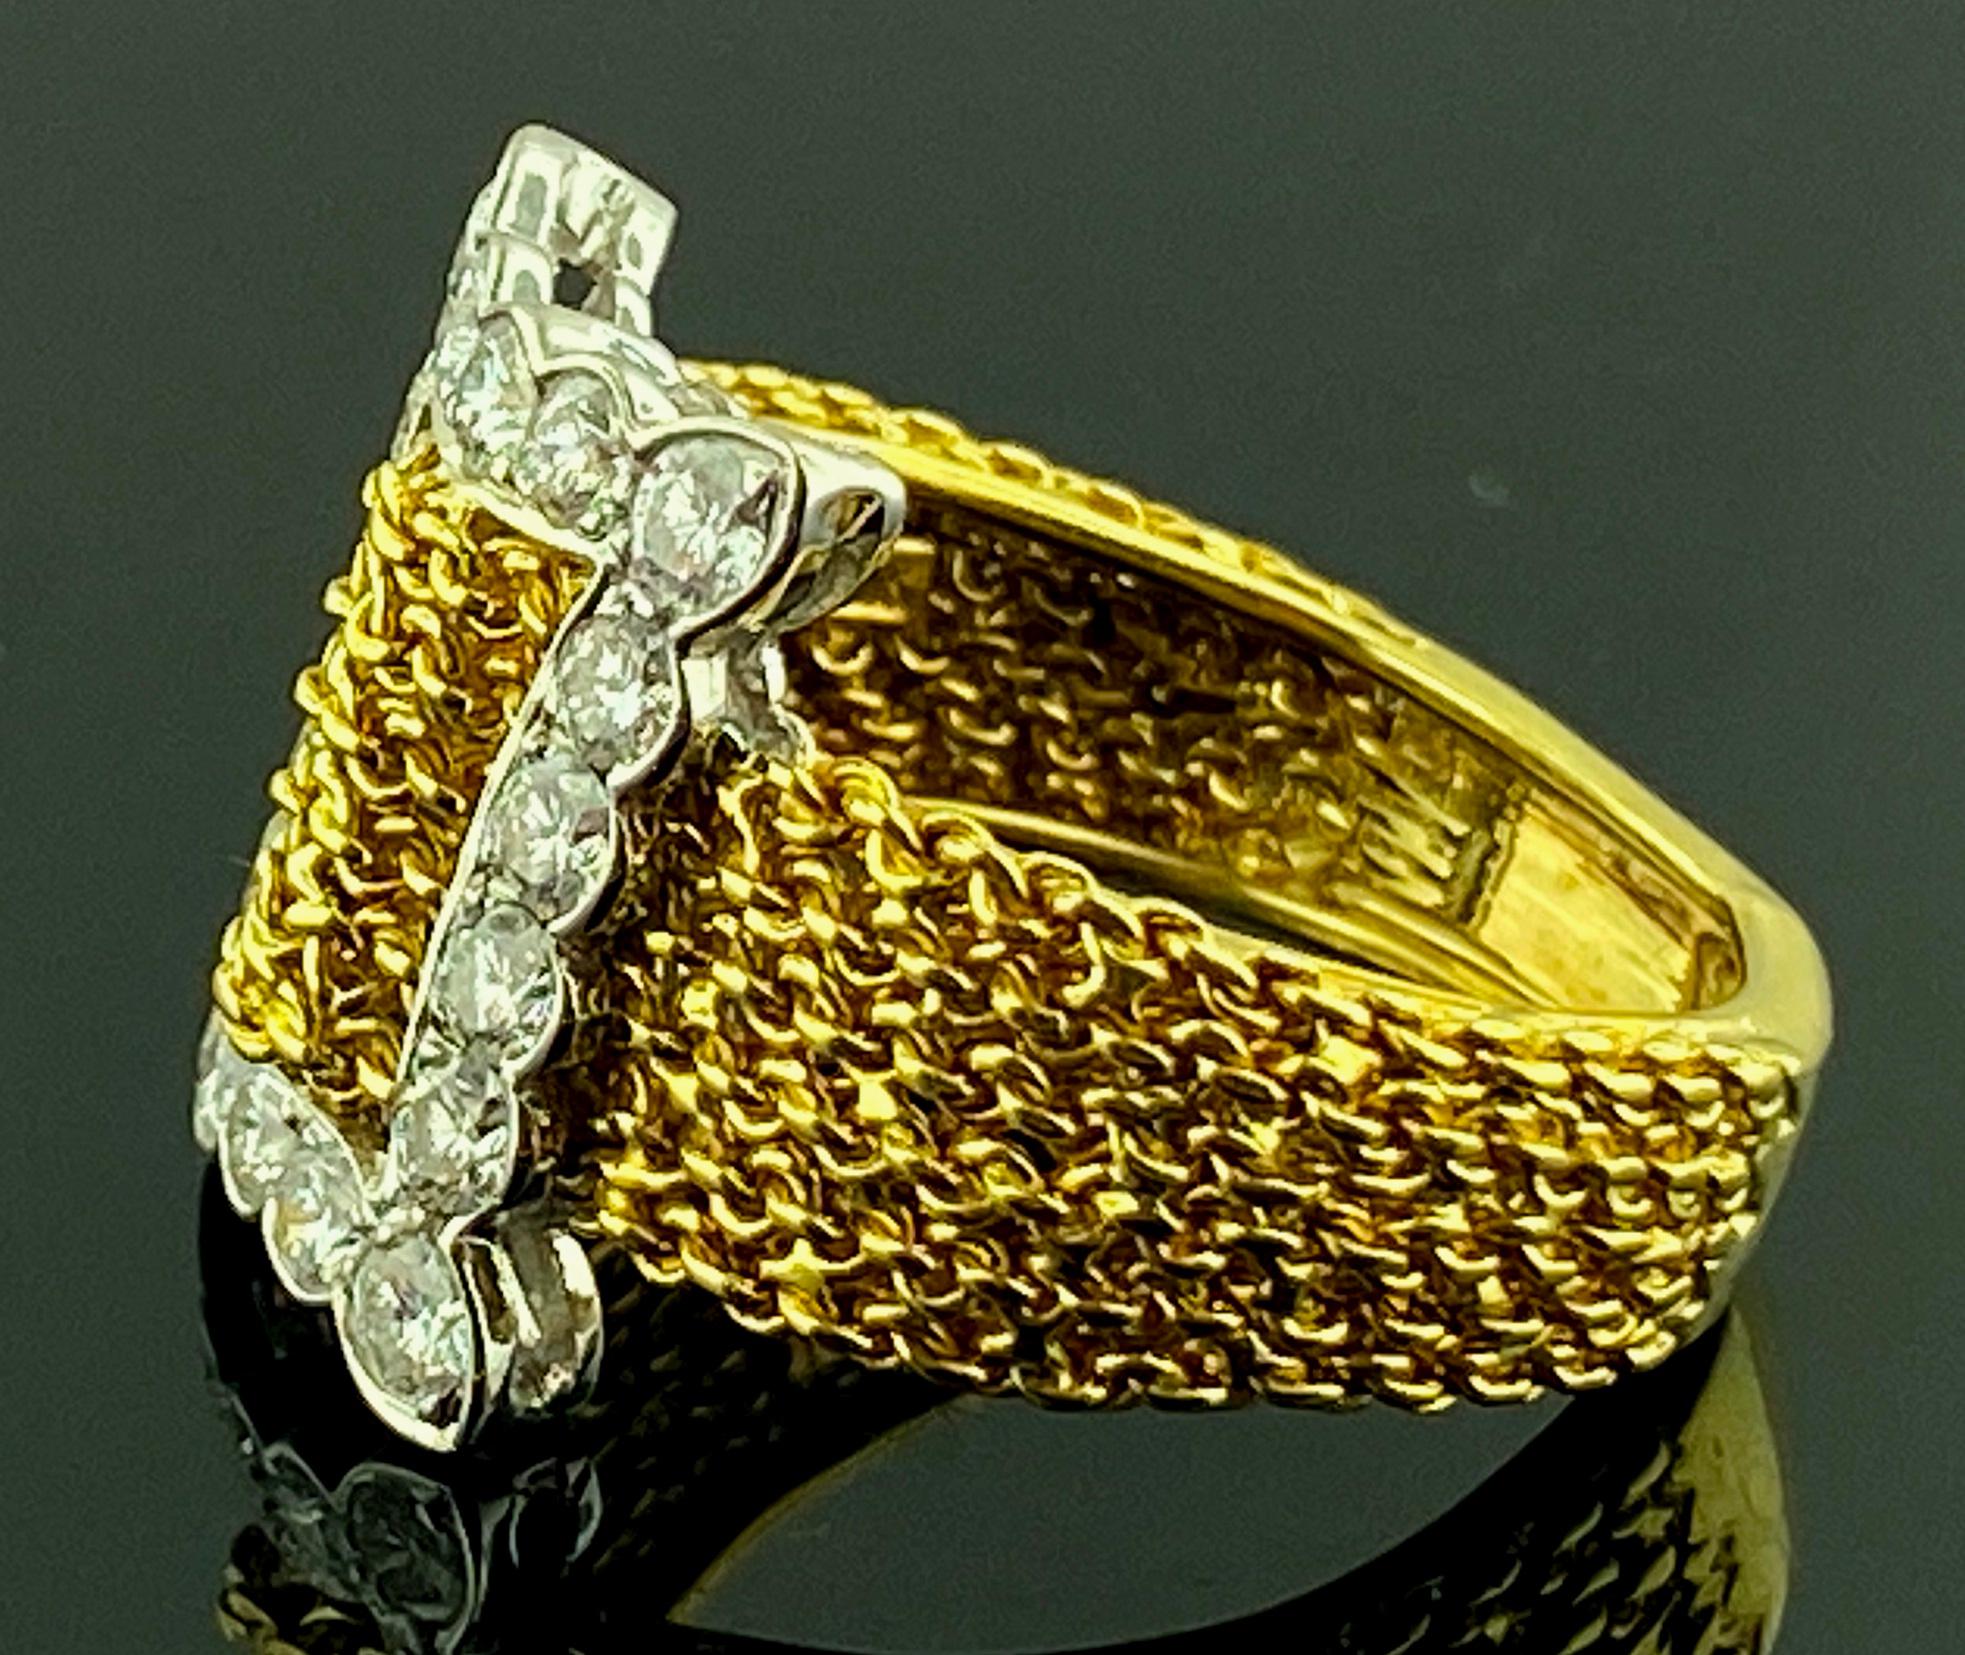 Set in 18 karat yellow gold are 18 round brilliant cut diamonds in a buckle fashion.  Total diamond weight is 1.00 carats.  Color is F-G, Clarity is VS.  Gold is 6 grams.  Ring size is 6.75.